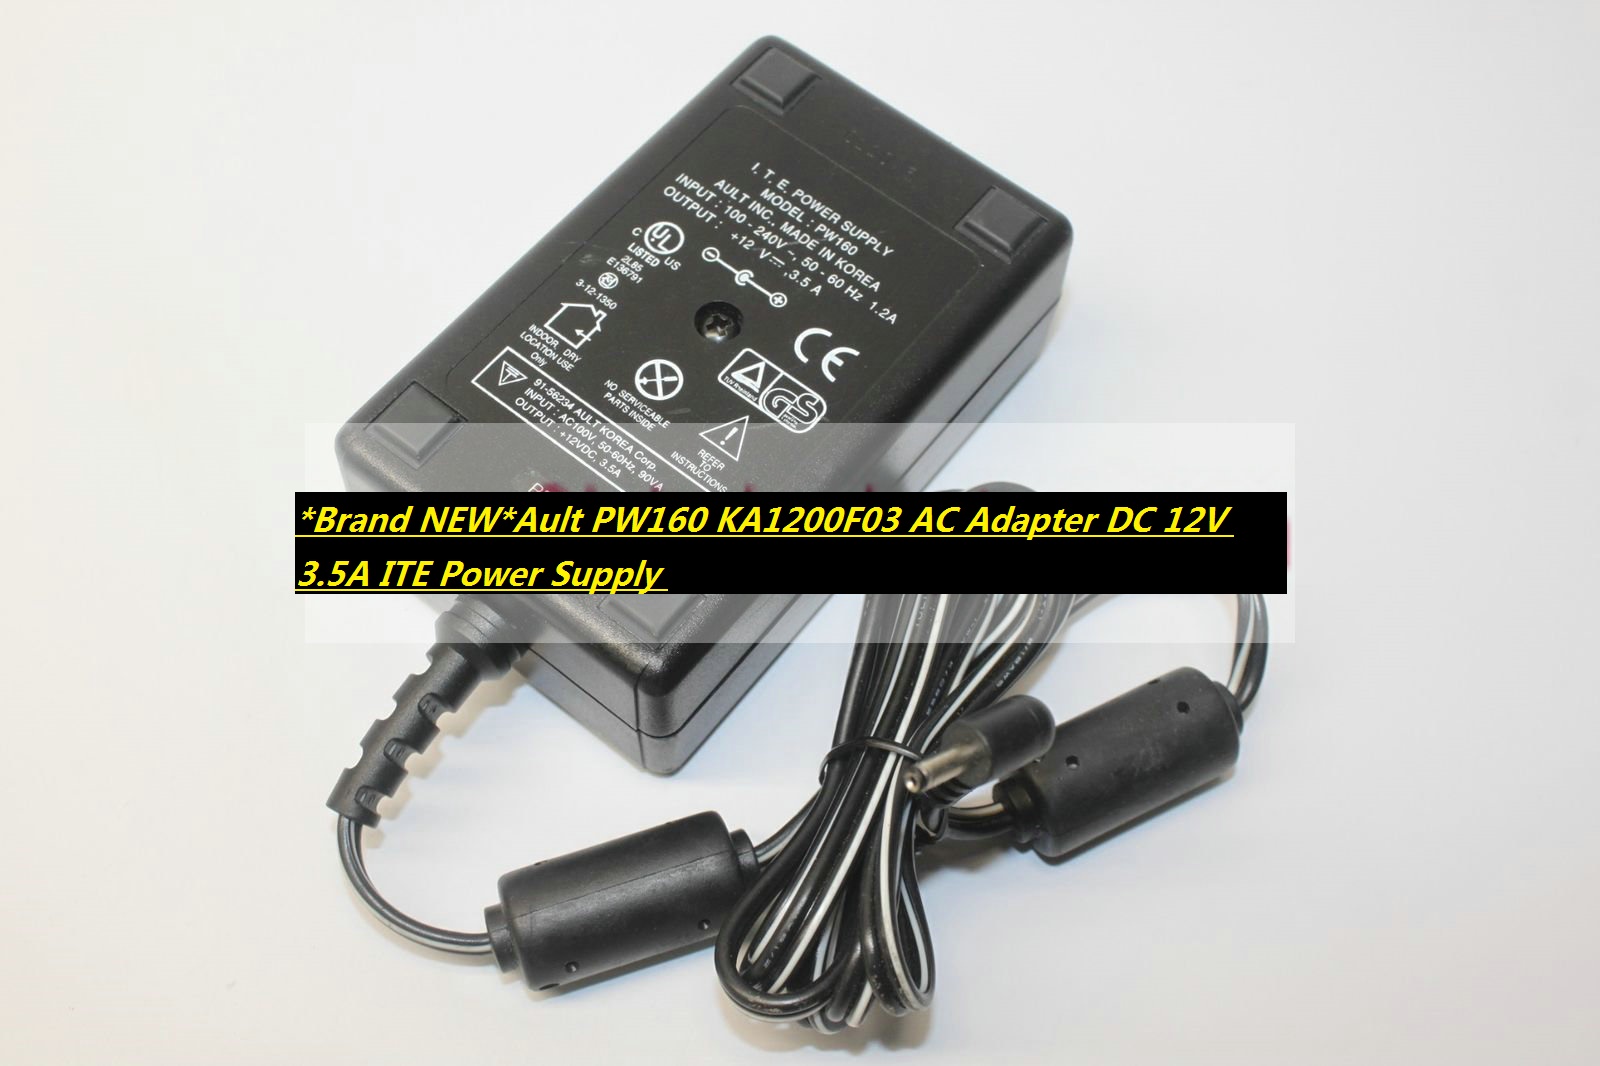 *Brand NEW*Ault PW160 KA1200F03 AC Adapter DC 12V 3.5A ITE Power Supply